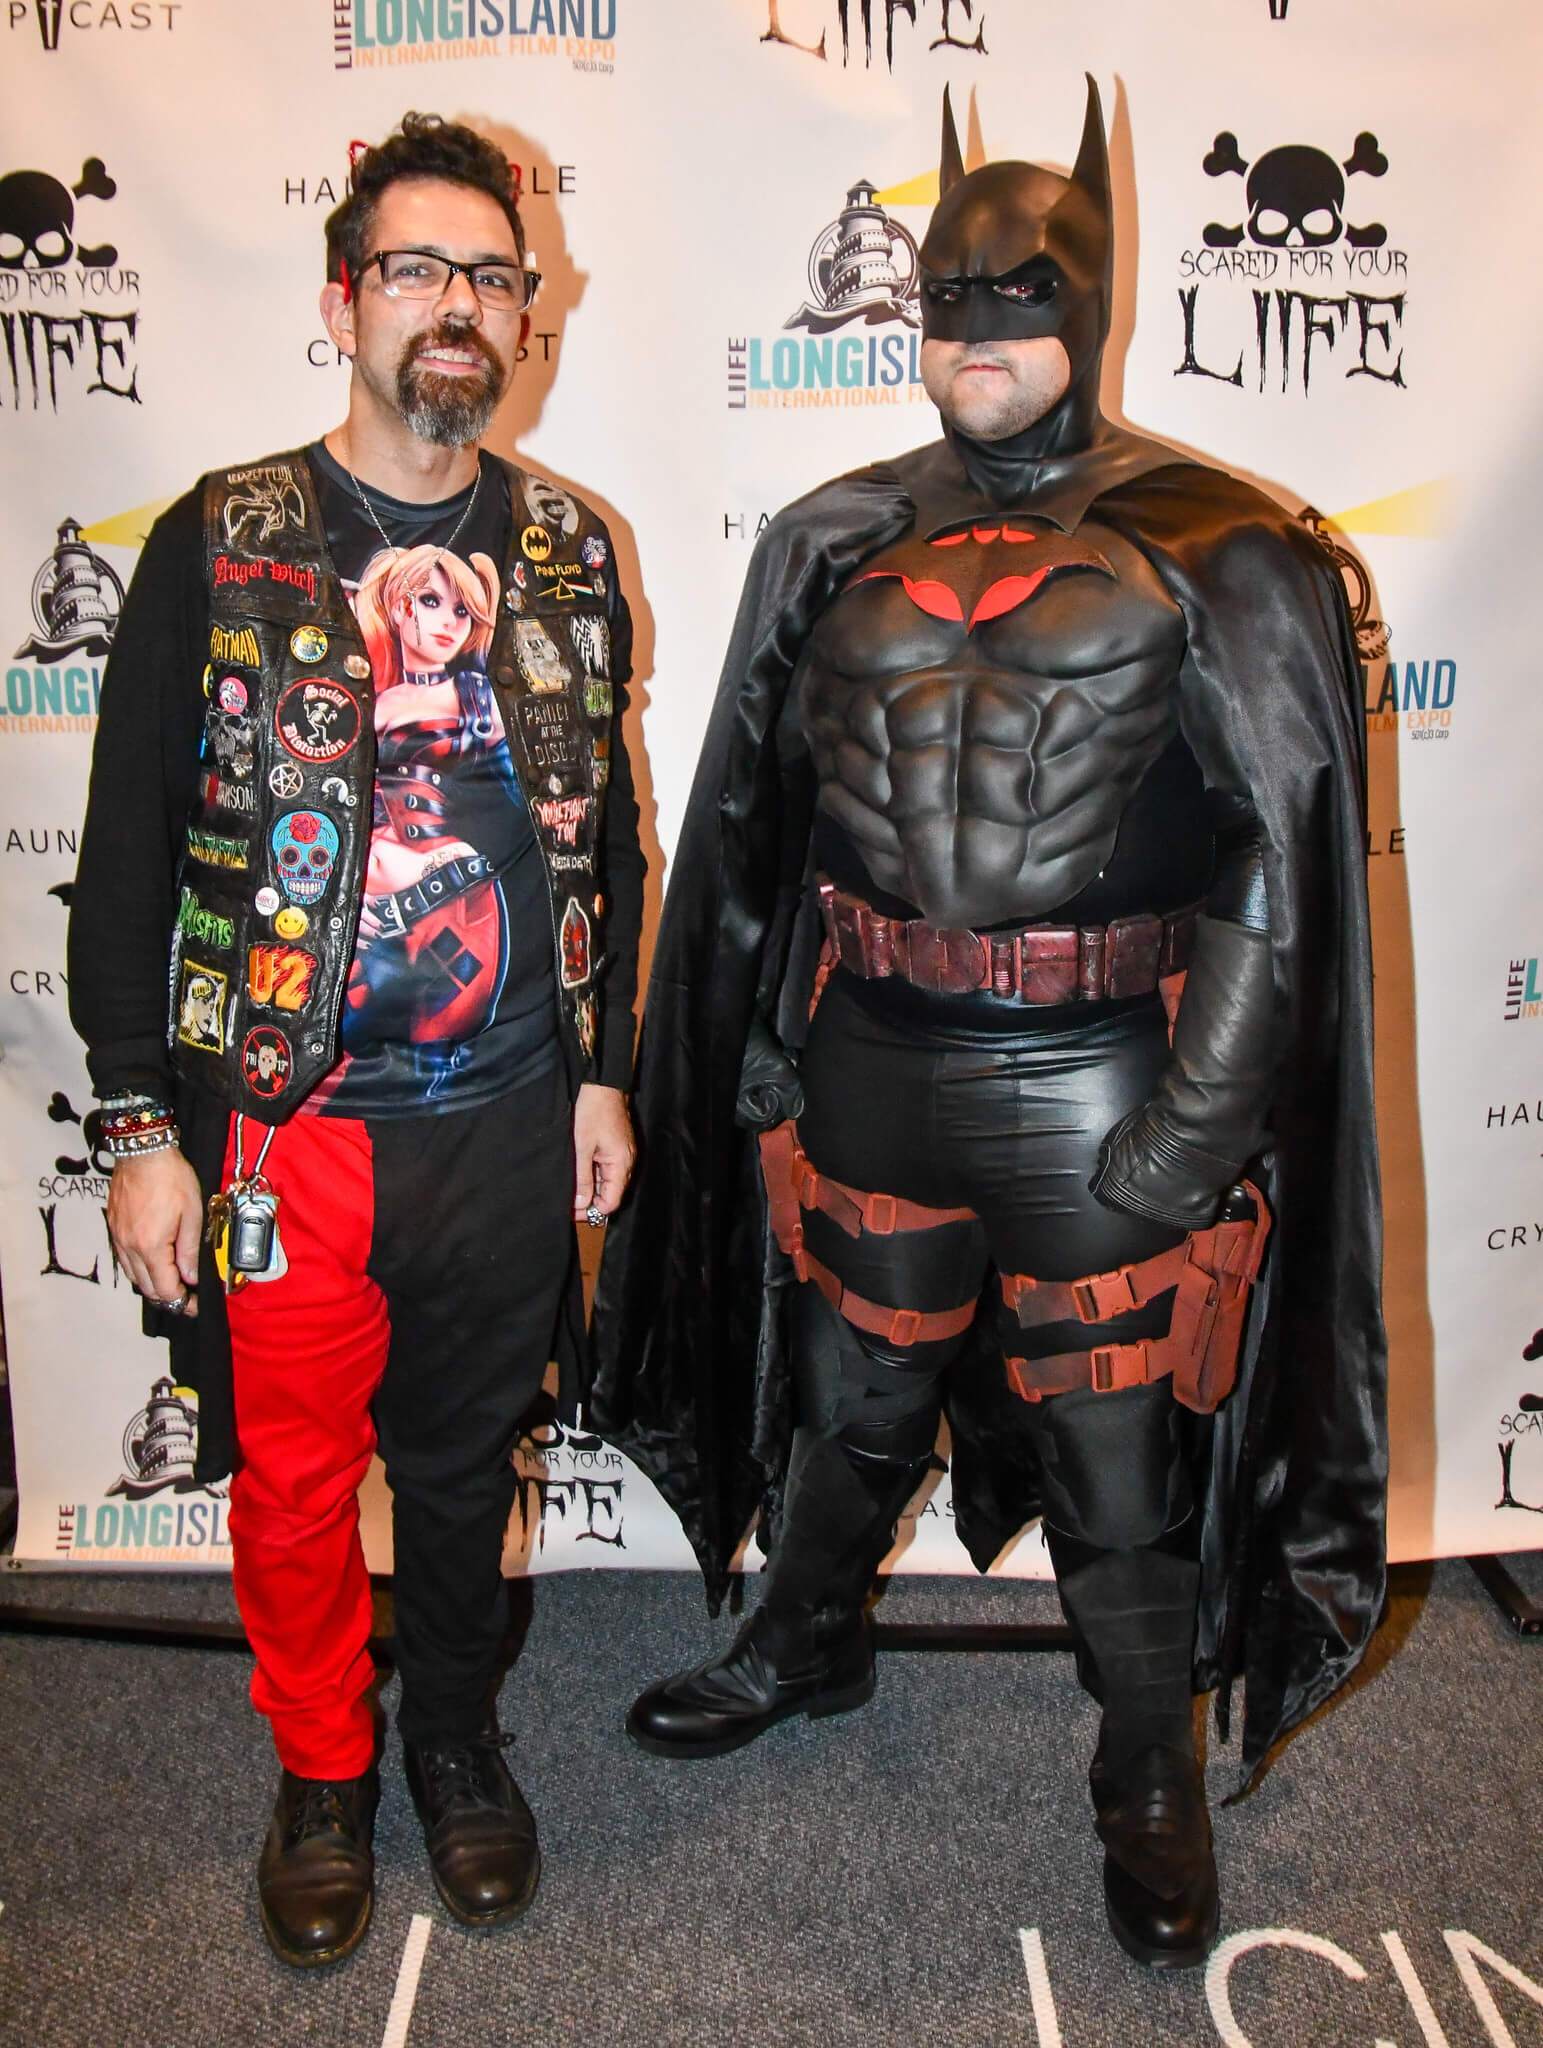 Image 14 The 6th Annual Scared for Your LIIFE Film Festival